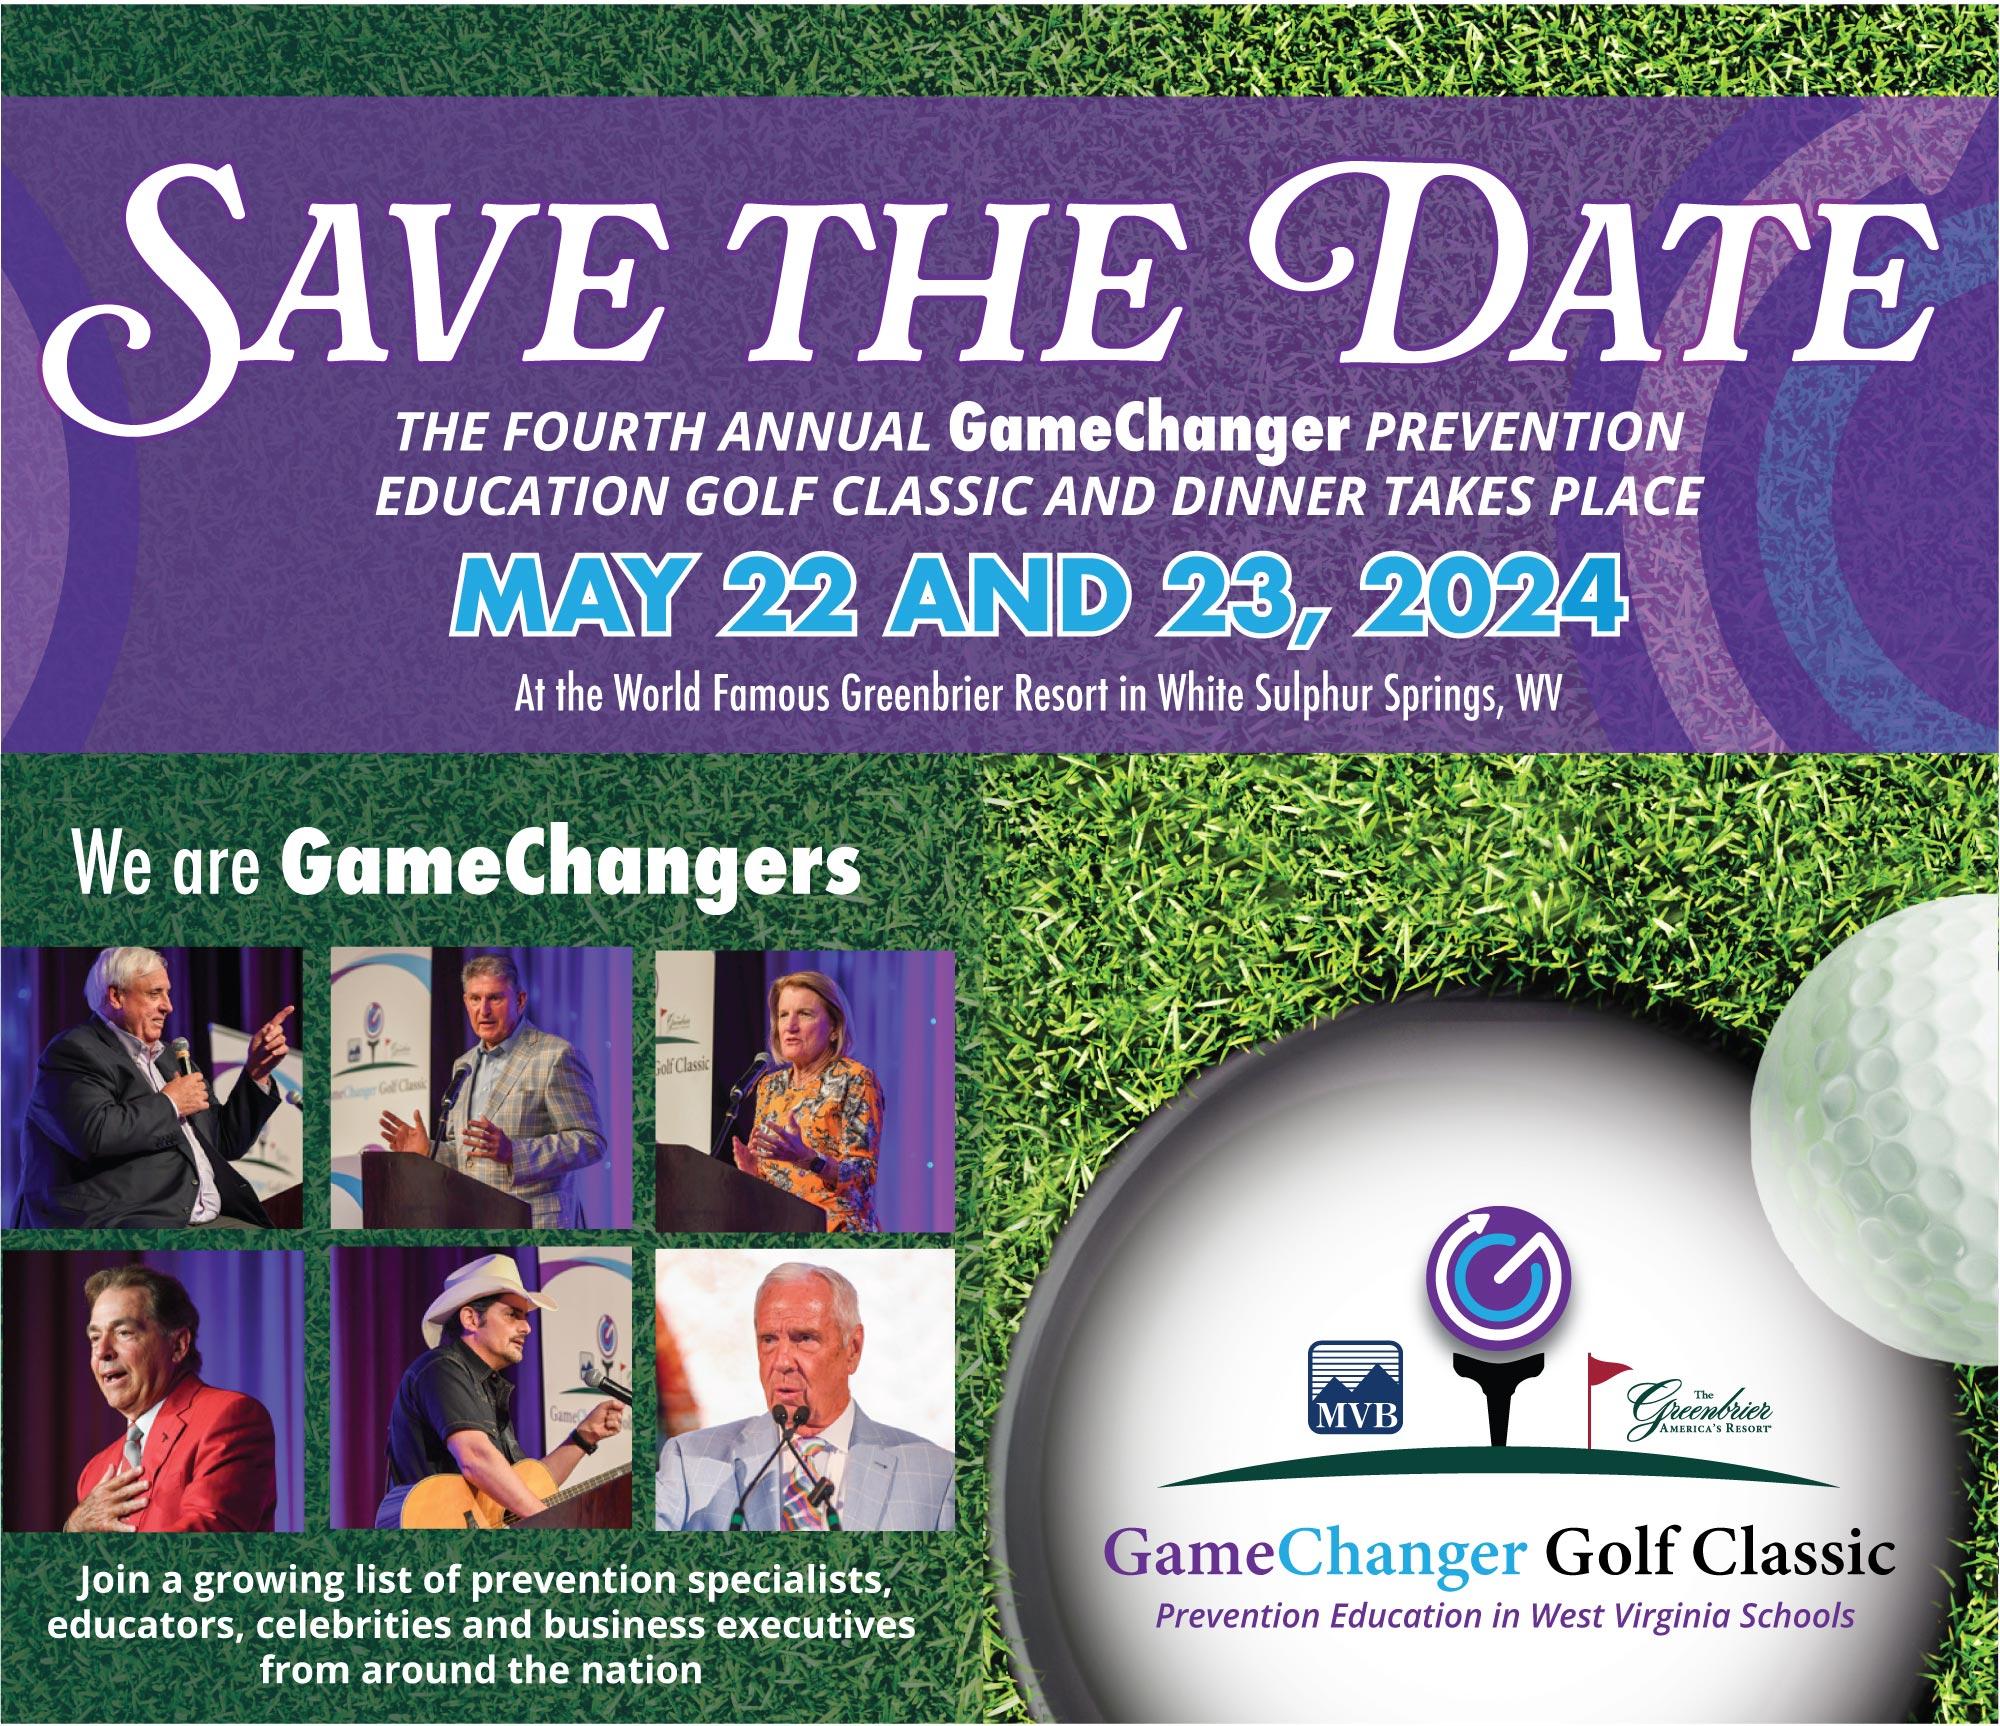 GameChanger Golf Classic: Save The Date 2024